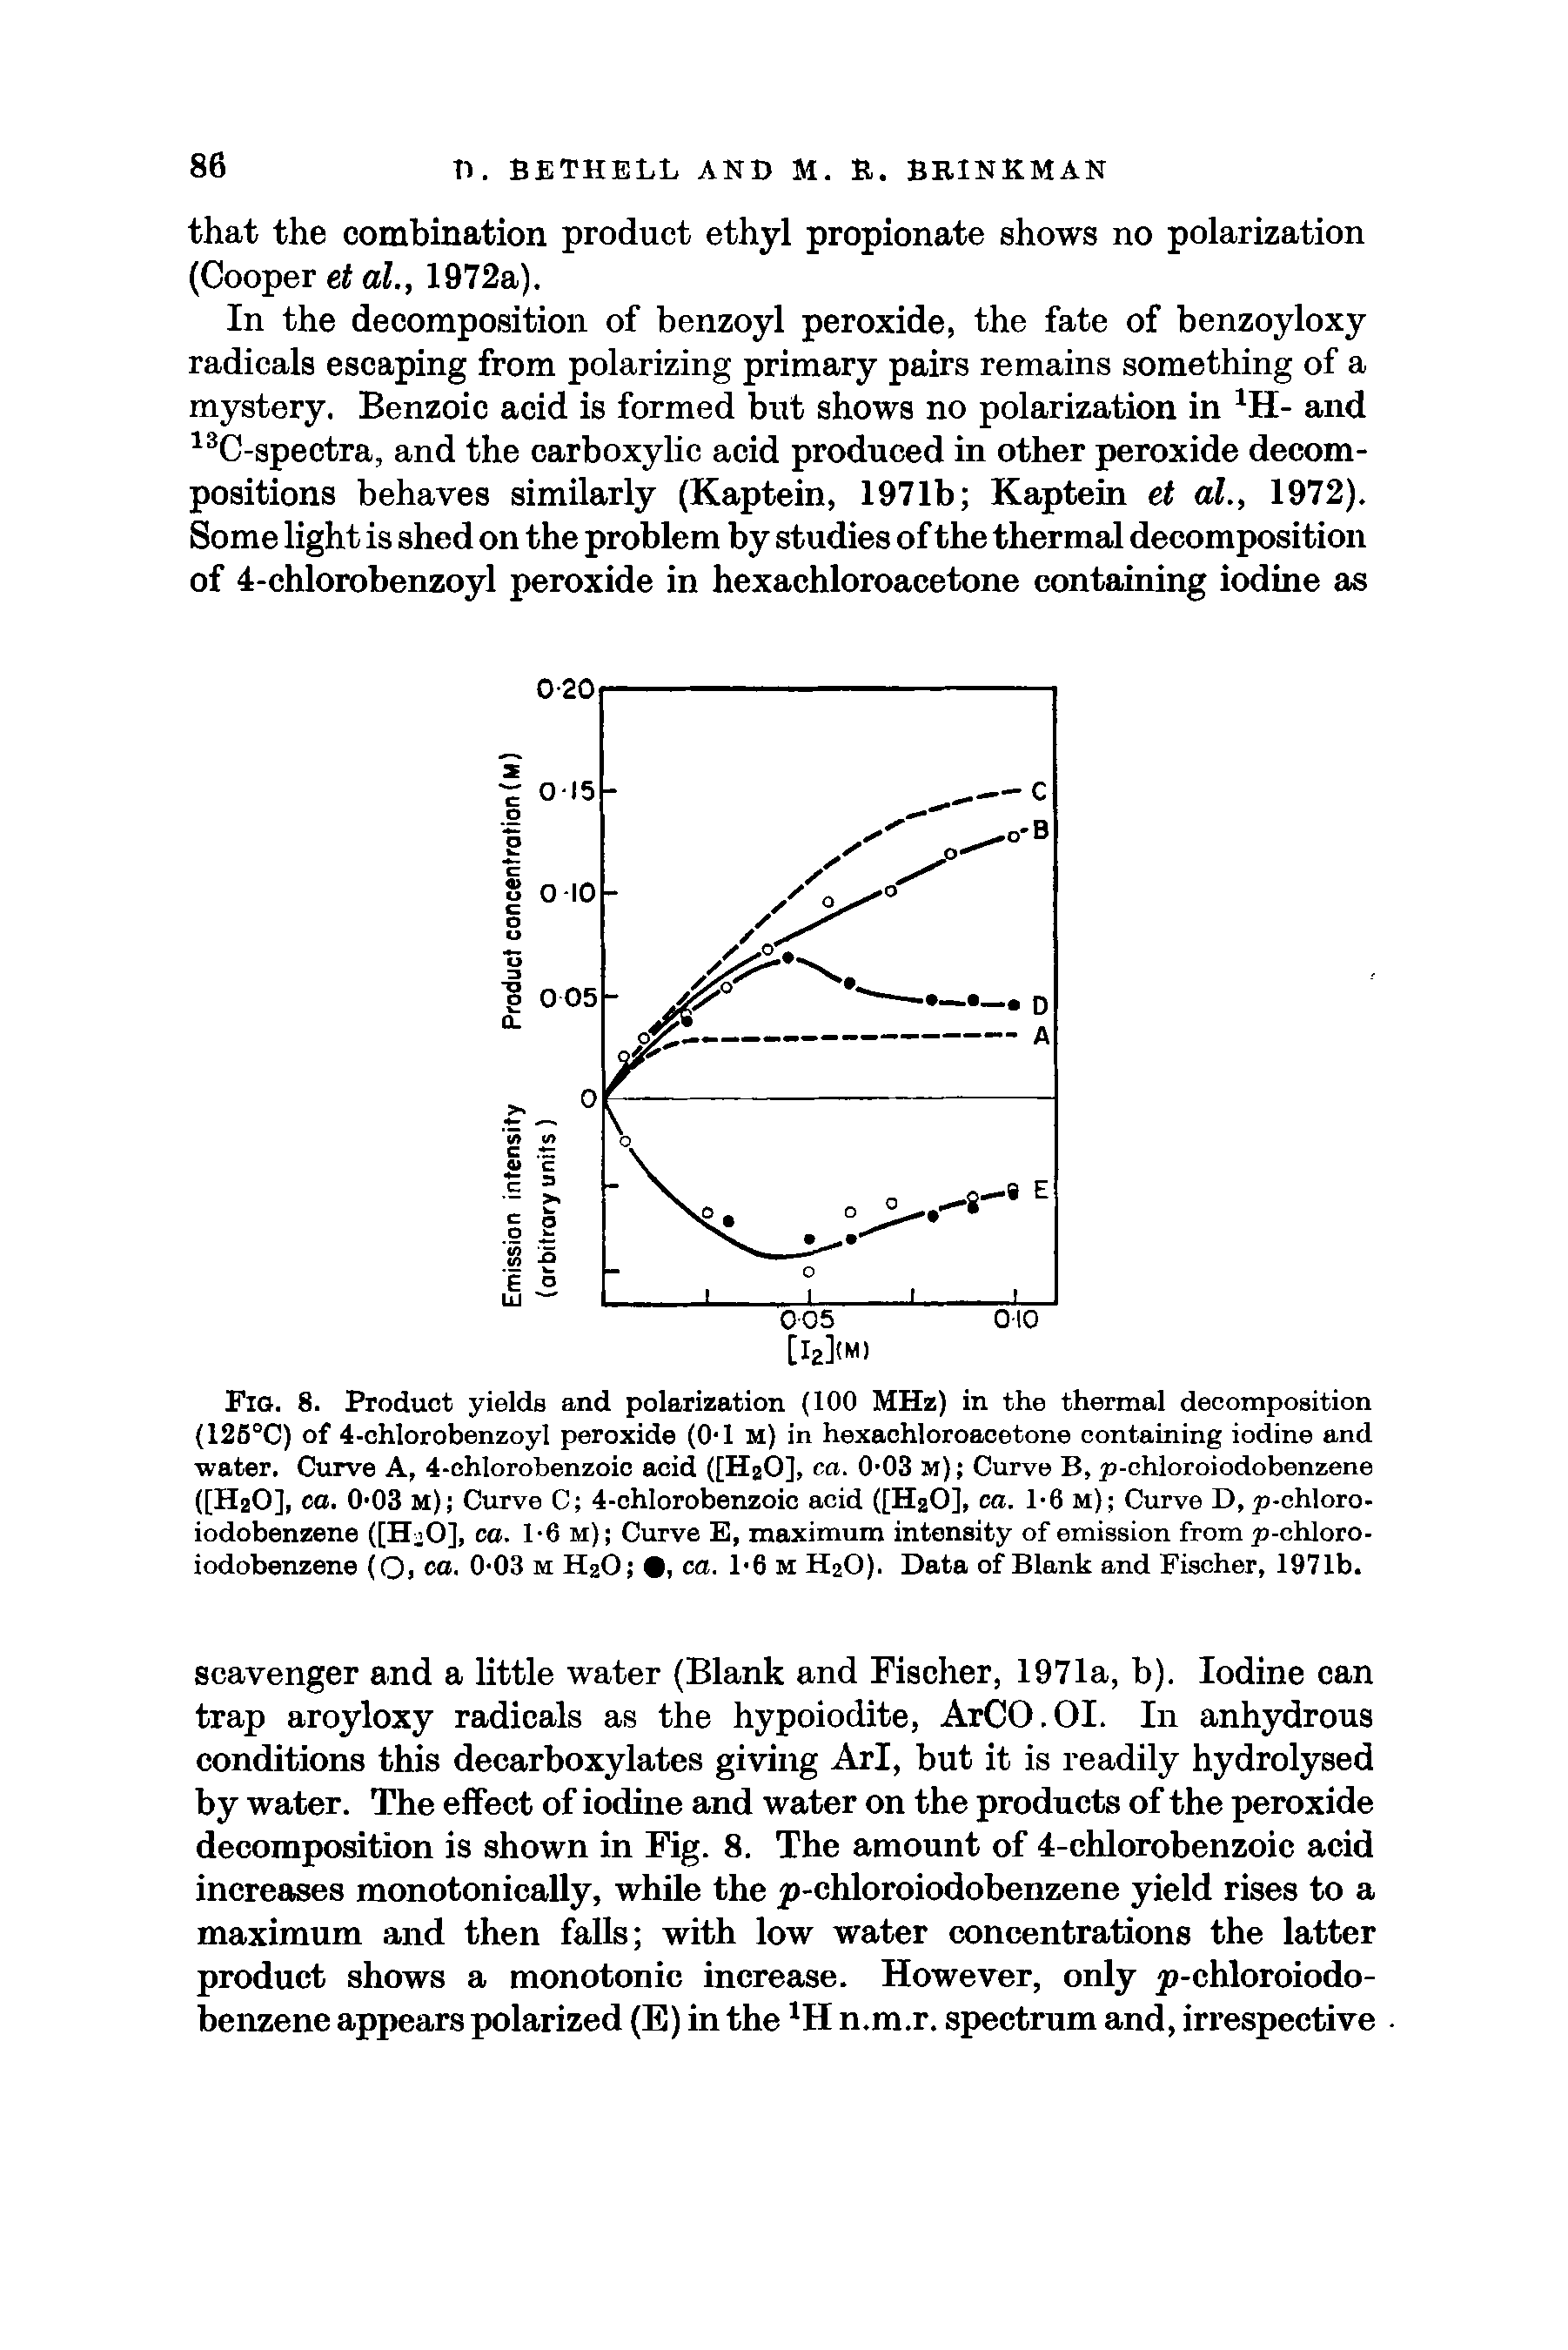 Fig. 8. Product yields and polarization (100 MHz) in the thermal decomposition (126°C) of 4-chlorobenzoyl peroxide (0-1 m) in hexachloroacetone containing iodine and water. Curve A, 4-ohlorobenzoic acid ([HjO], ca. 0-03 M) Curve B, p-chloroiodobenzene ([H2O], CO. 0-03 m) Curve C 4-chIorobenzoic acid ([HaO], ca. 1-6 m) Curve D, p-chloro-iodobenzene ([H O], ca. 1-6 m) Curve E, maximum intensity of emission from p-chloro-iodobenzene (O, co. 0-03 m H2O , ca. 1-6 M H2O). Data of Blank and Fischer, 1971b.